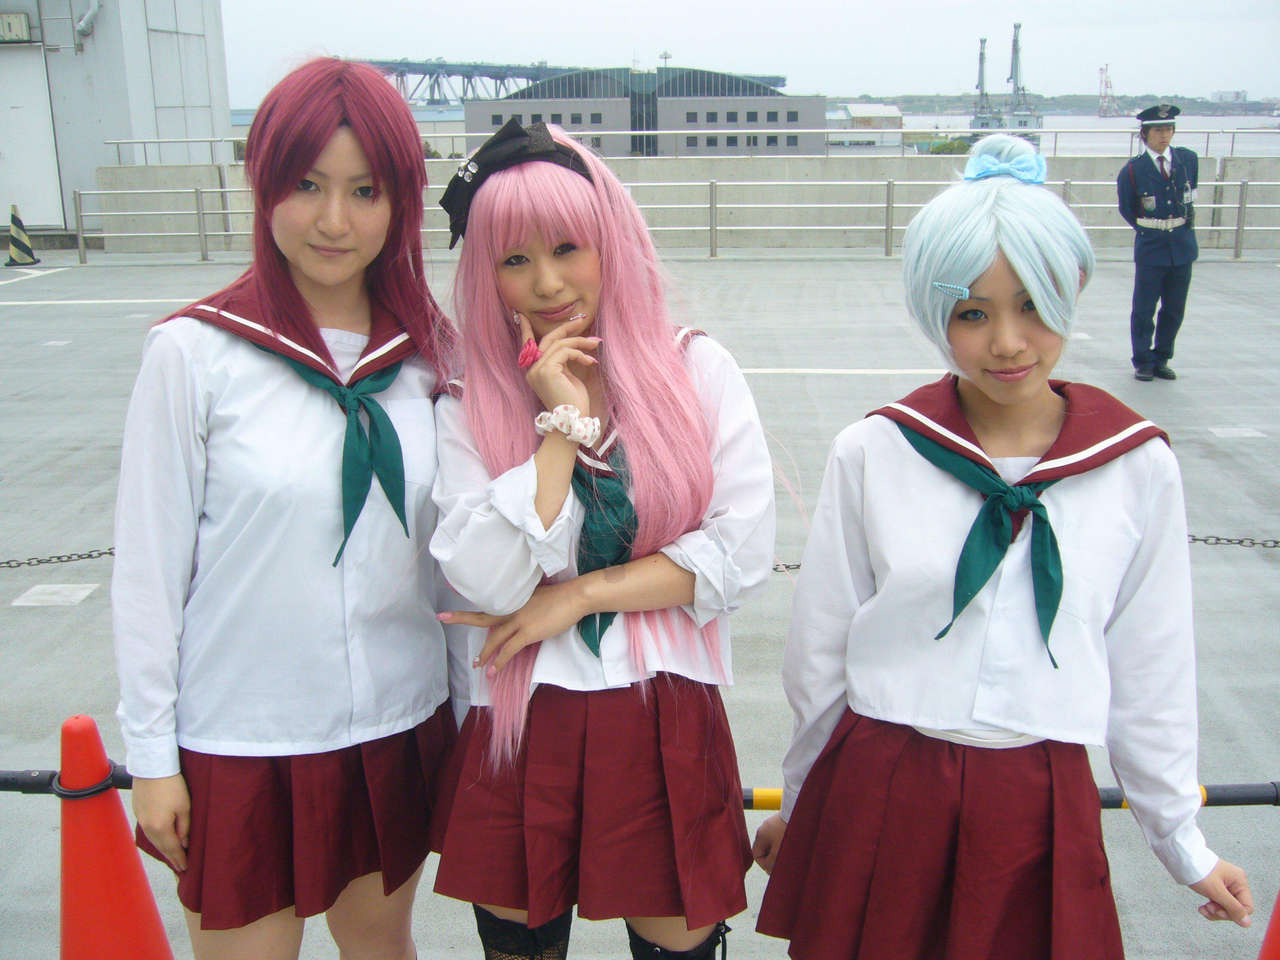 Which Anime Characters Are These Girls Cosplayin